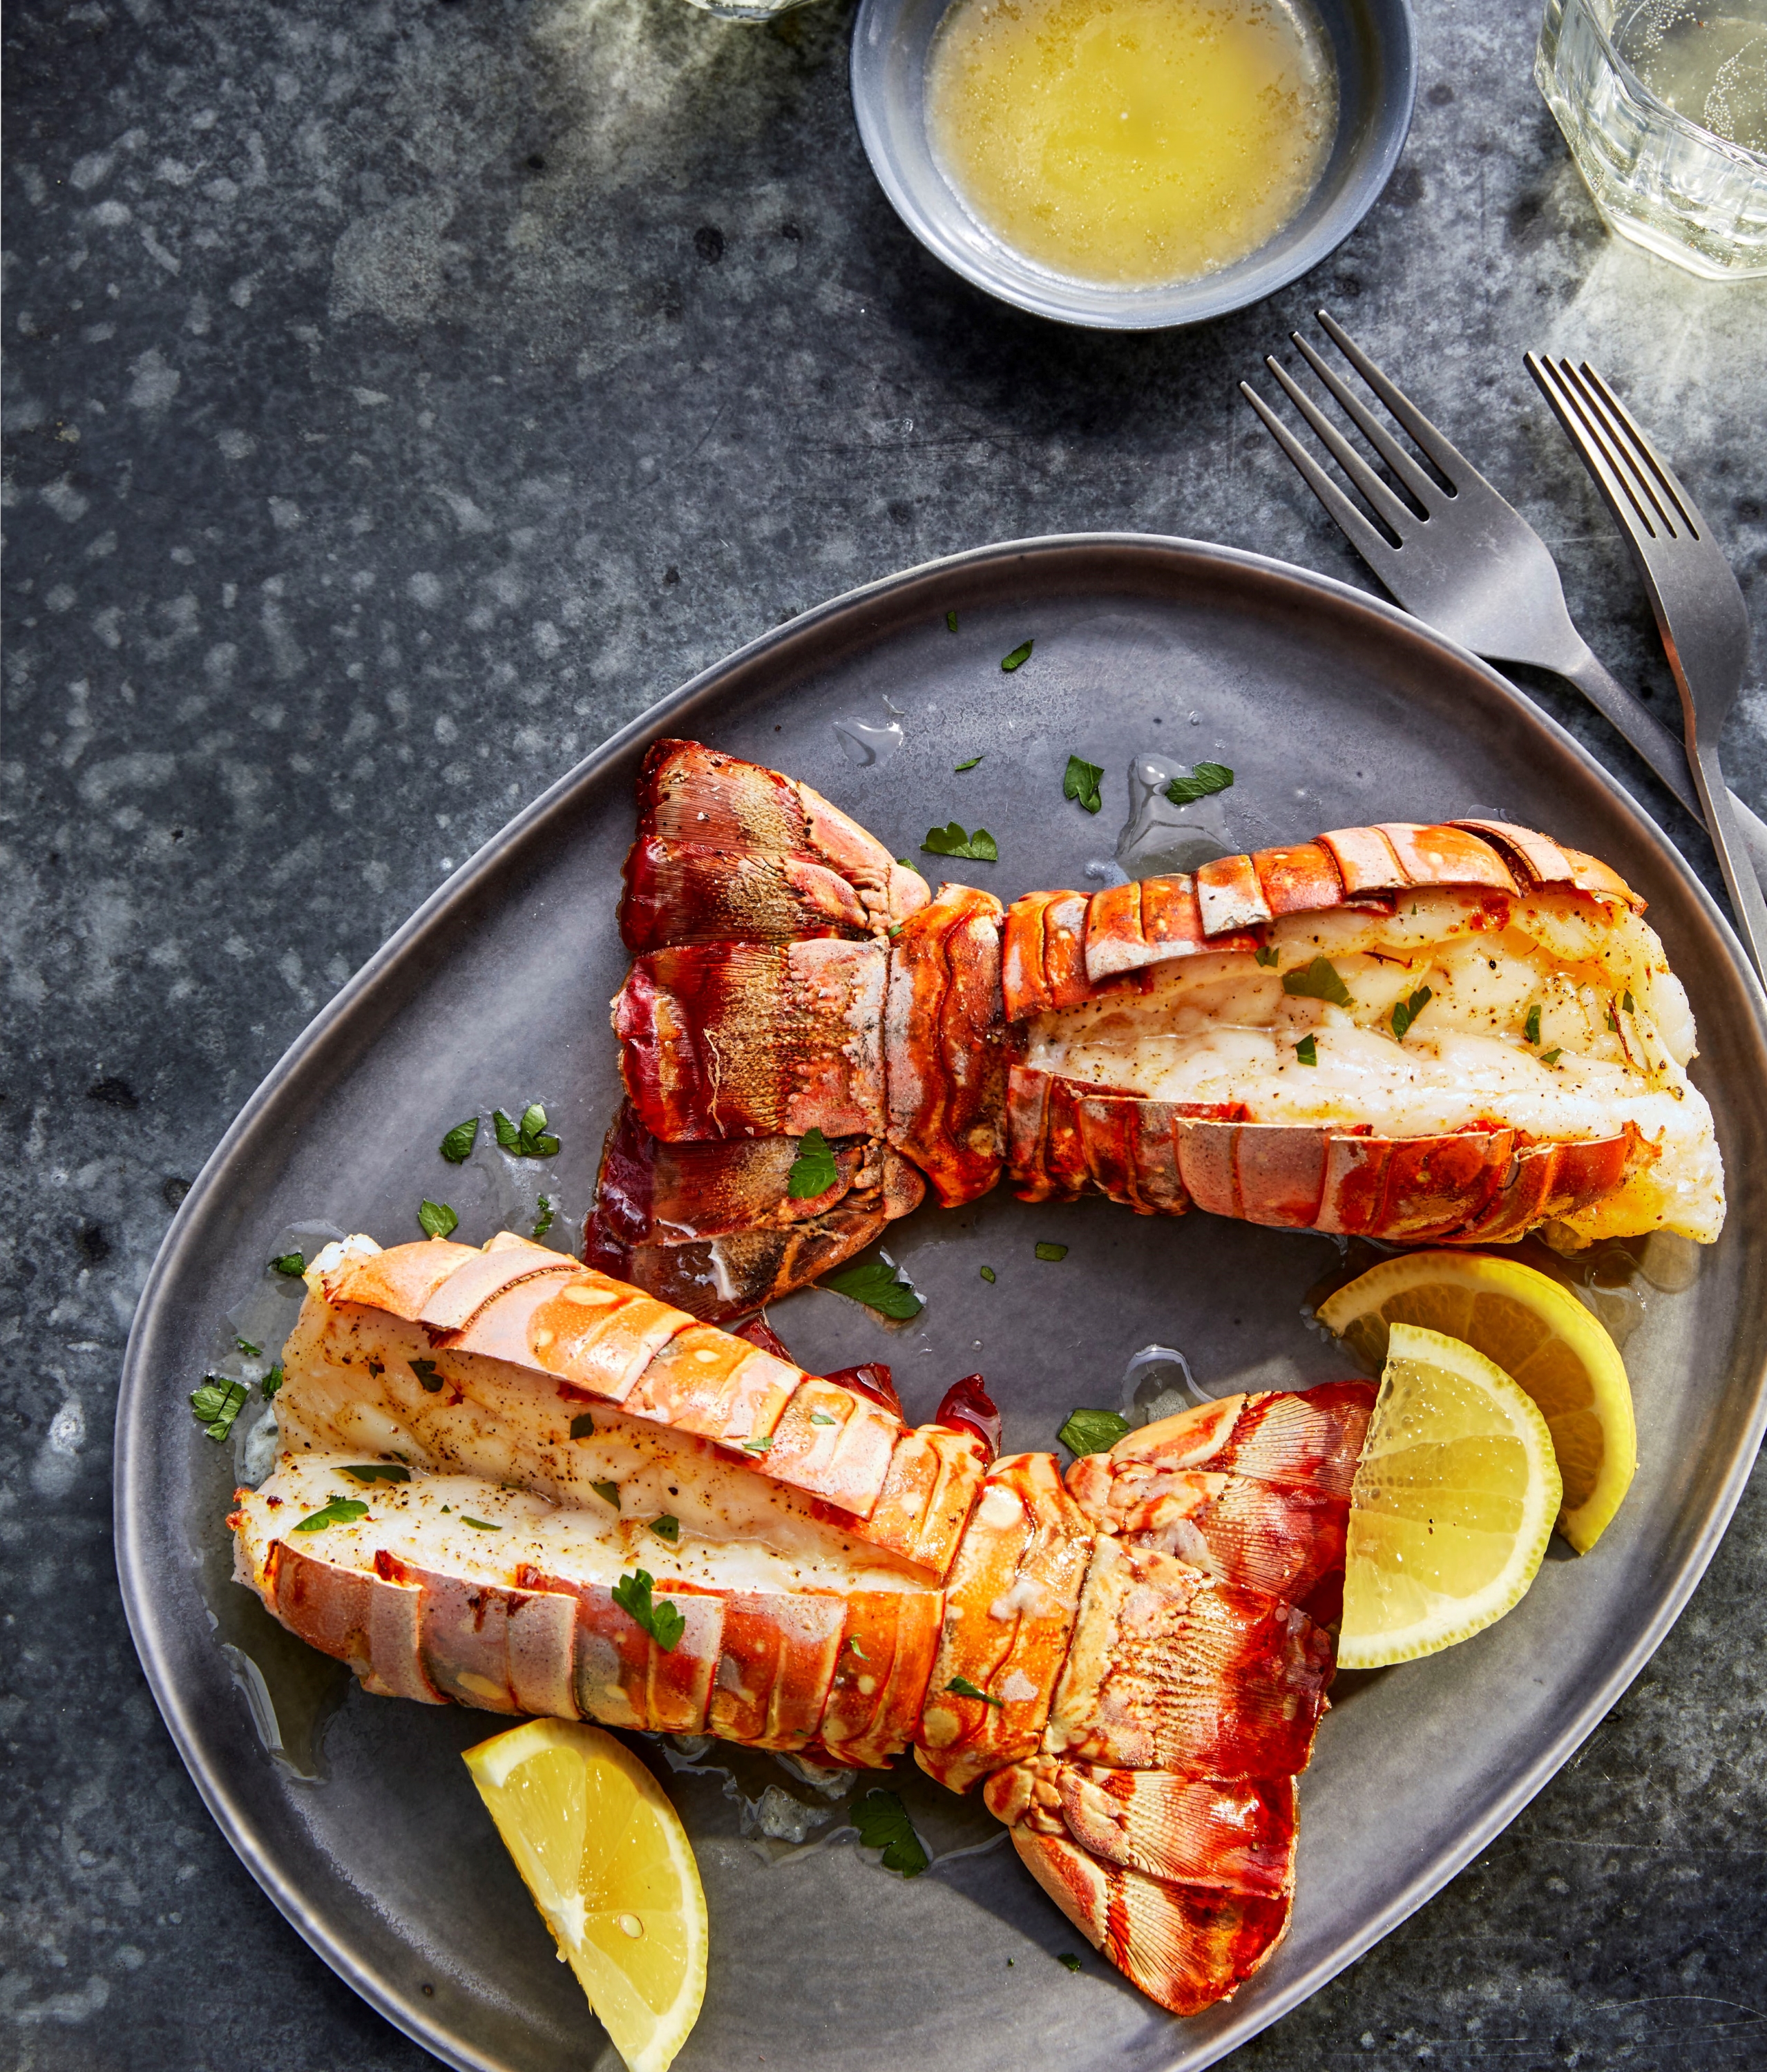 Go ahead, indulge in meaty lobster tails cooked in your air fryer and served with a lemon-garlic butter sauce. "Loved this!" raves Soup Loving Nicole. "I will never cook lobster in anything other than an air fryer again!"
                          